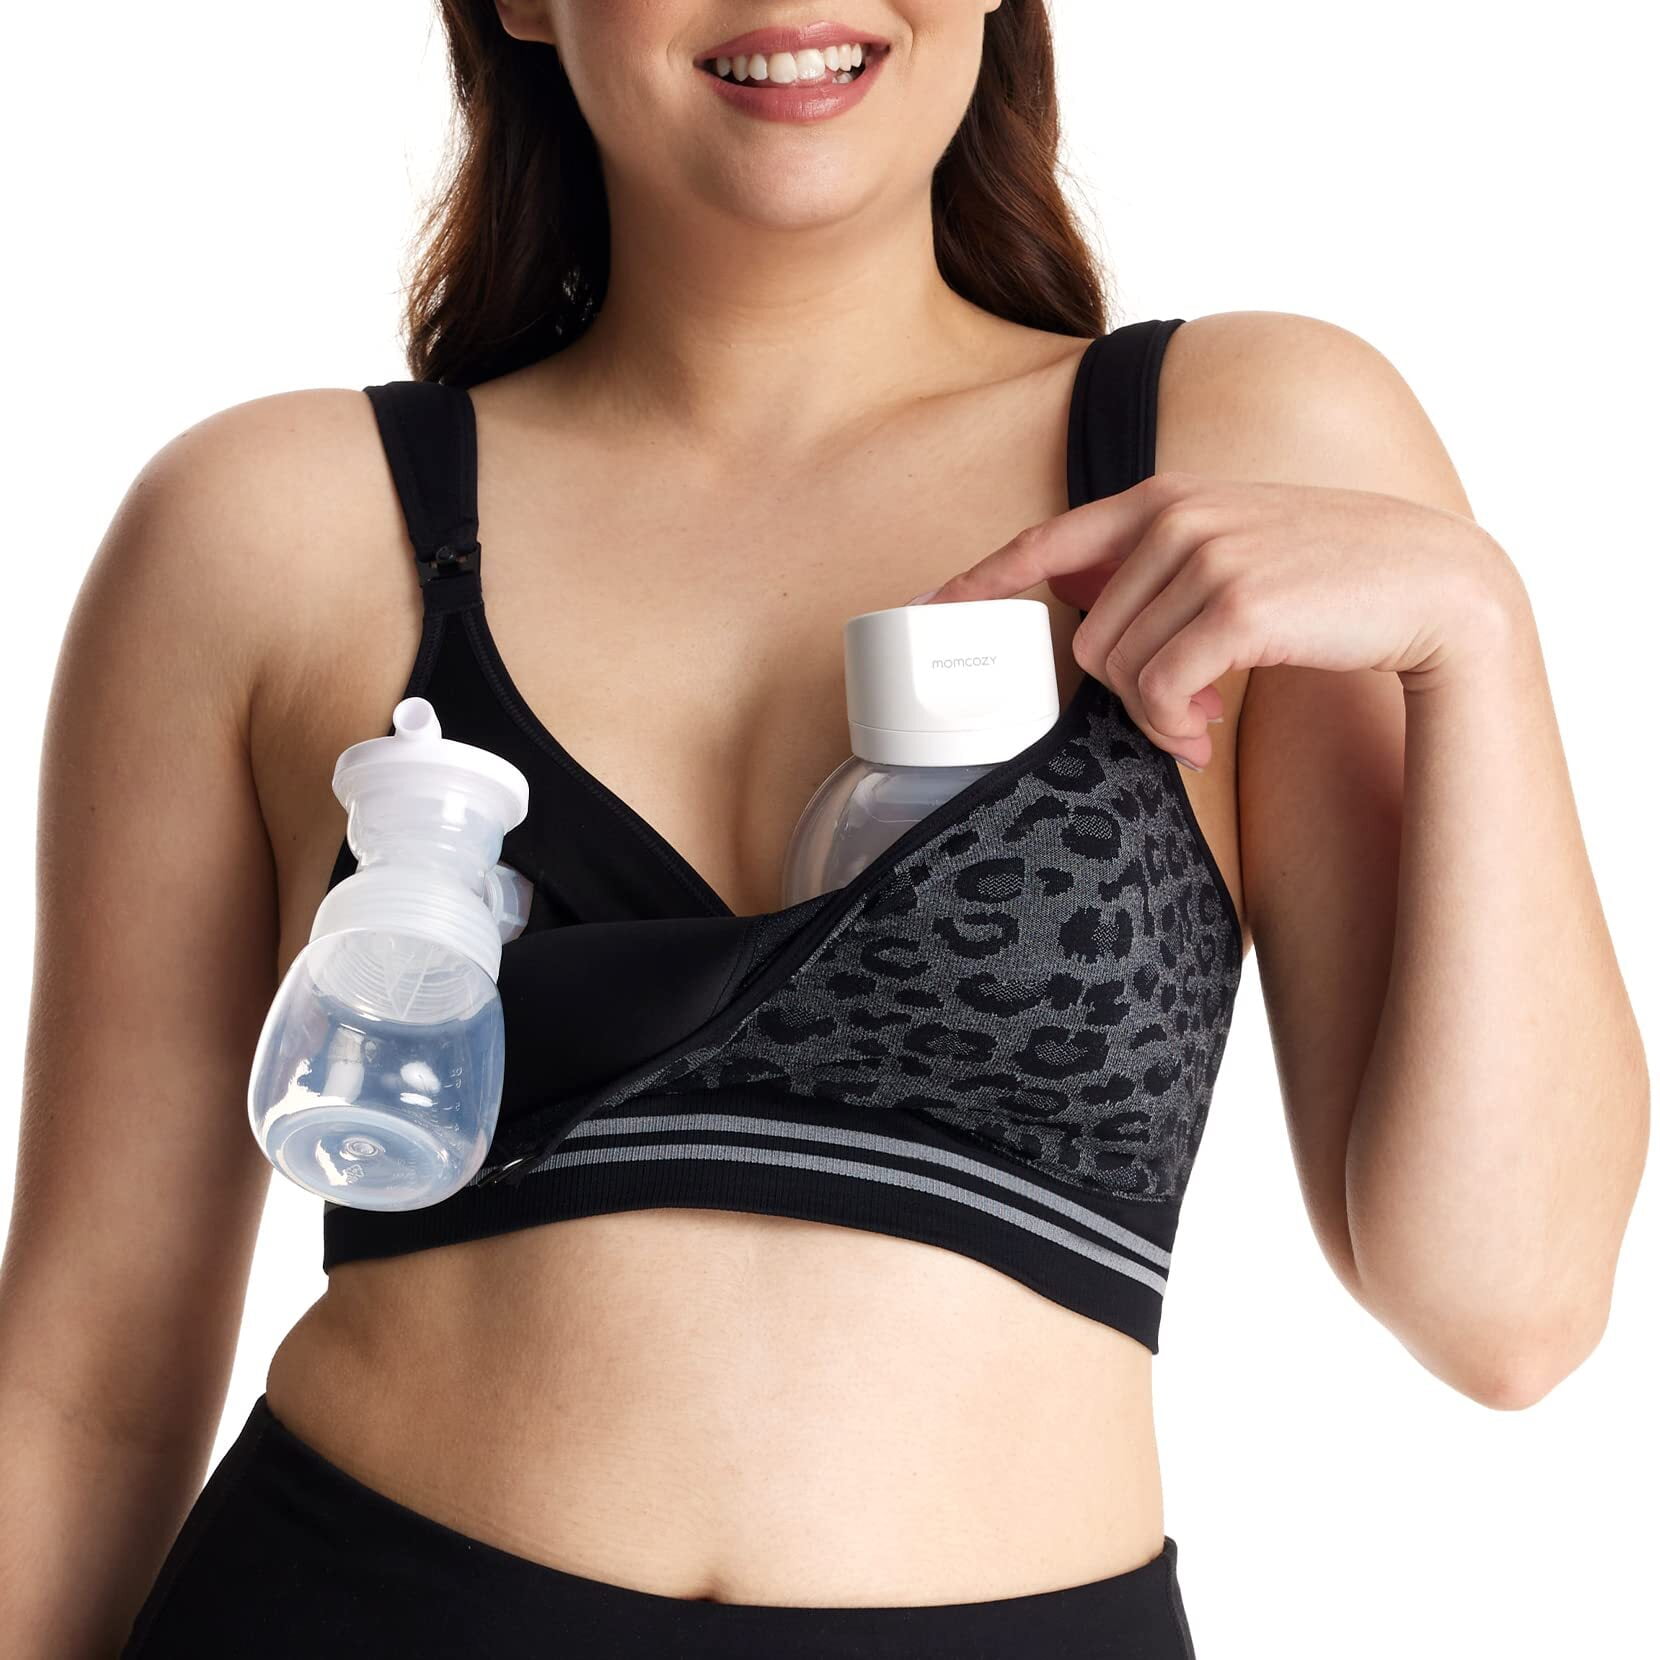 Simple Wishes Supermom Pumping And Nursing Bra, Hands Free Maternity Bra  For Breastfeeding, Comfortable Soft Breast Pump Bra